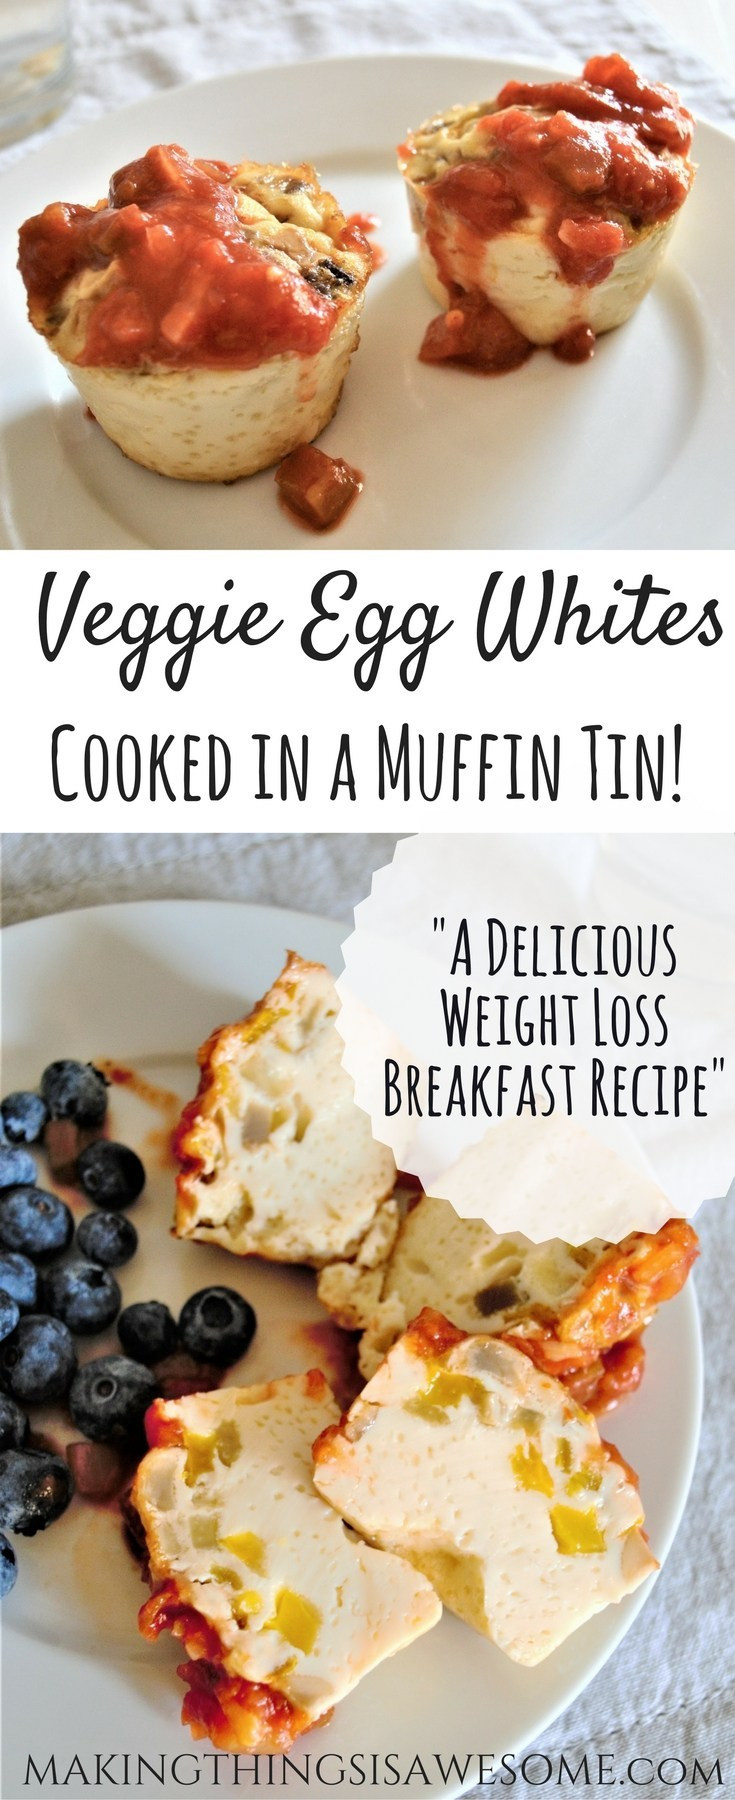 Egg White Recipes For Weight Loss
 Veggie Egg Whites Cooked In a Muffin Tin A Weight Loss